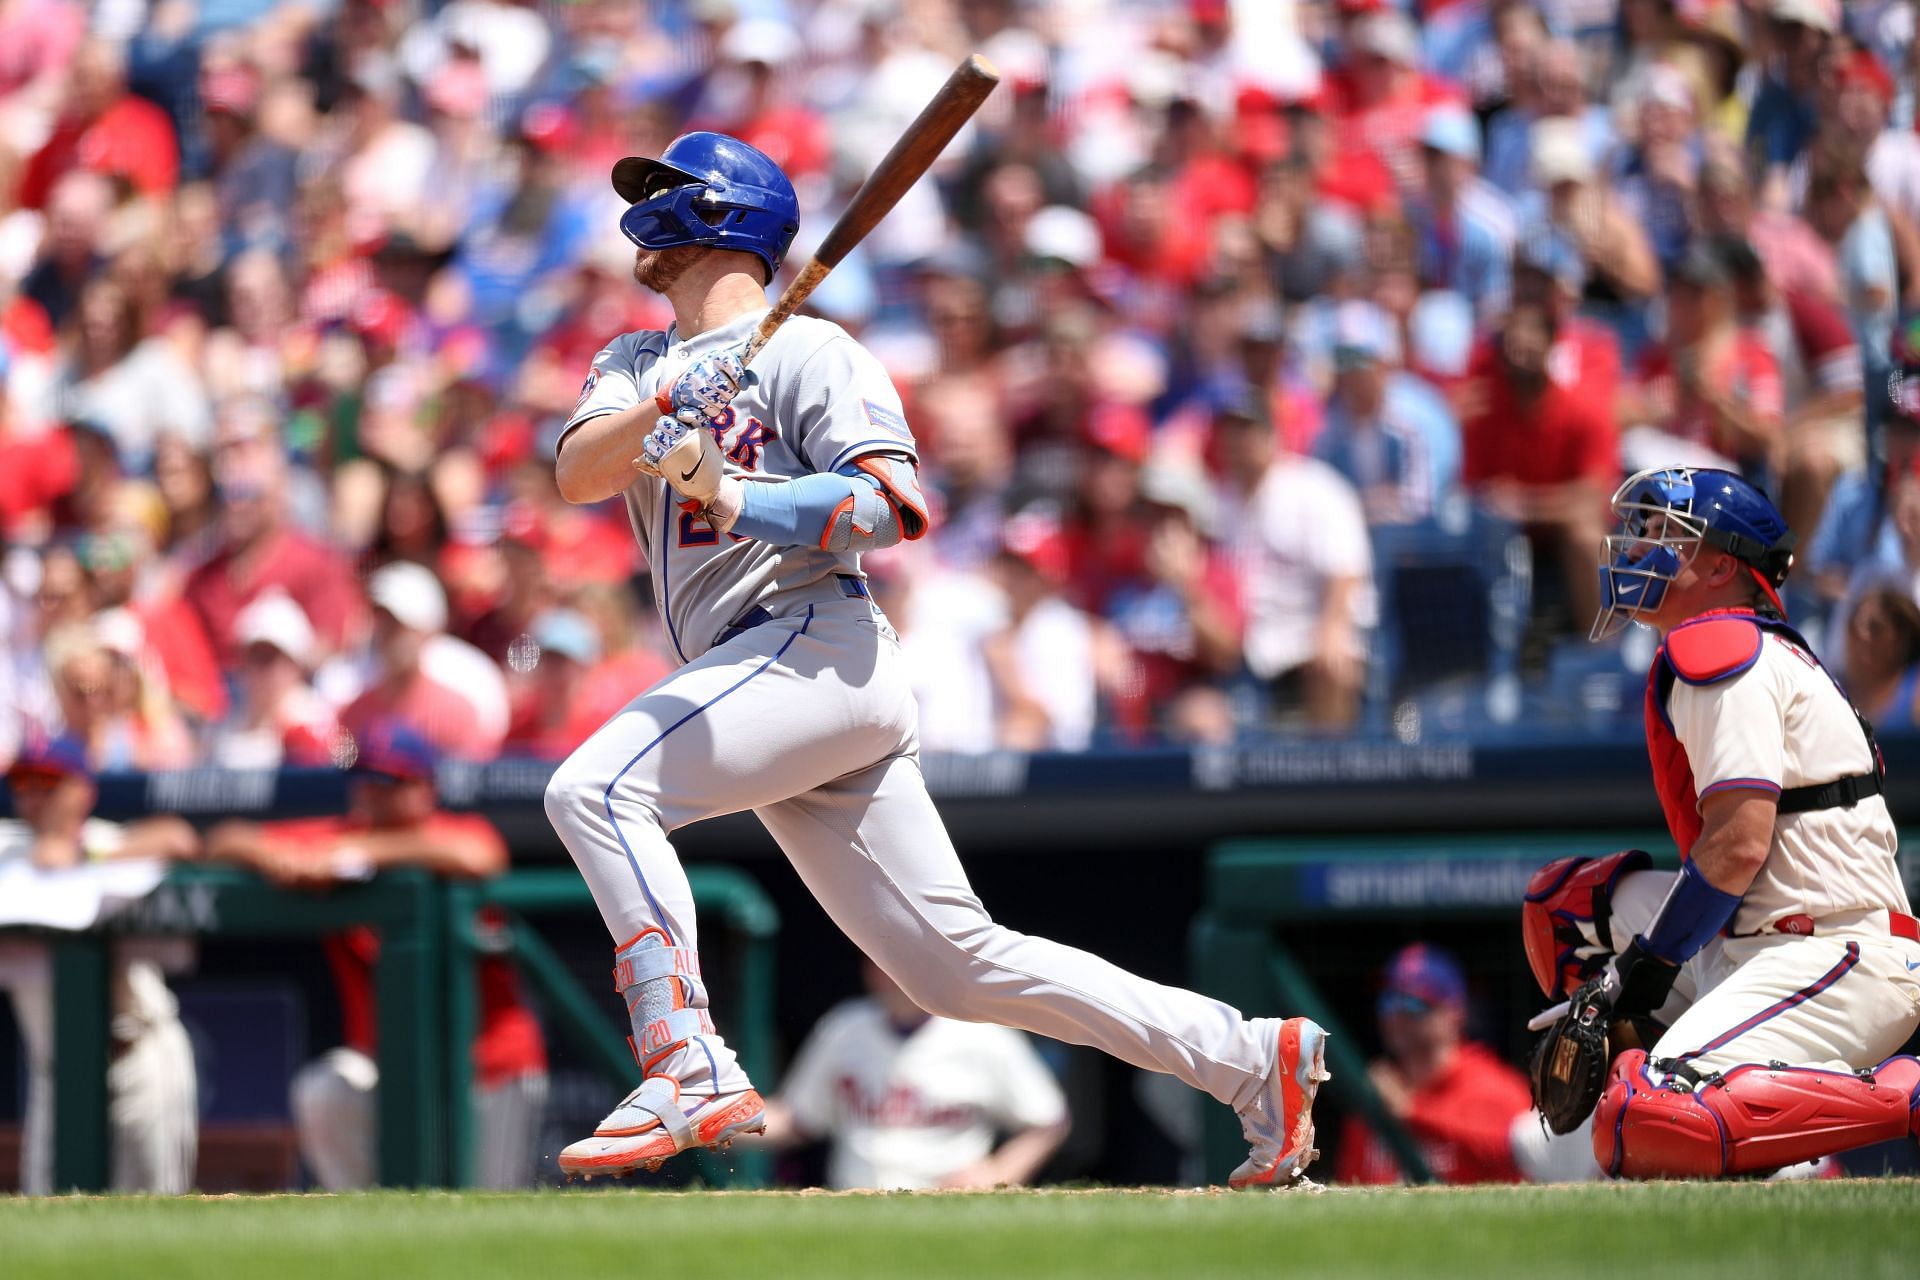 Can Pete Alonso win the Home Run Derby? Rating New York Mets